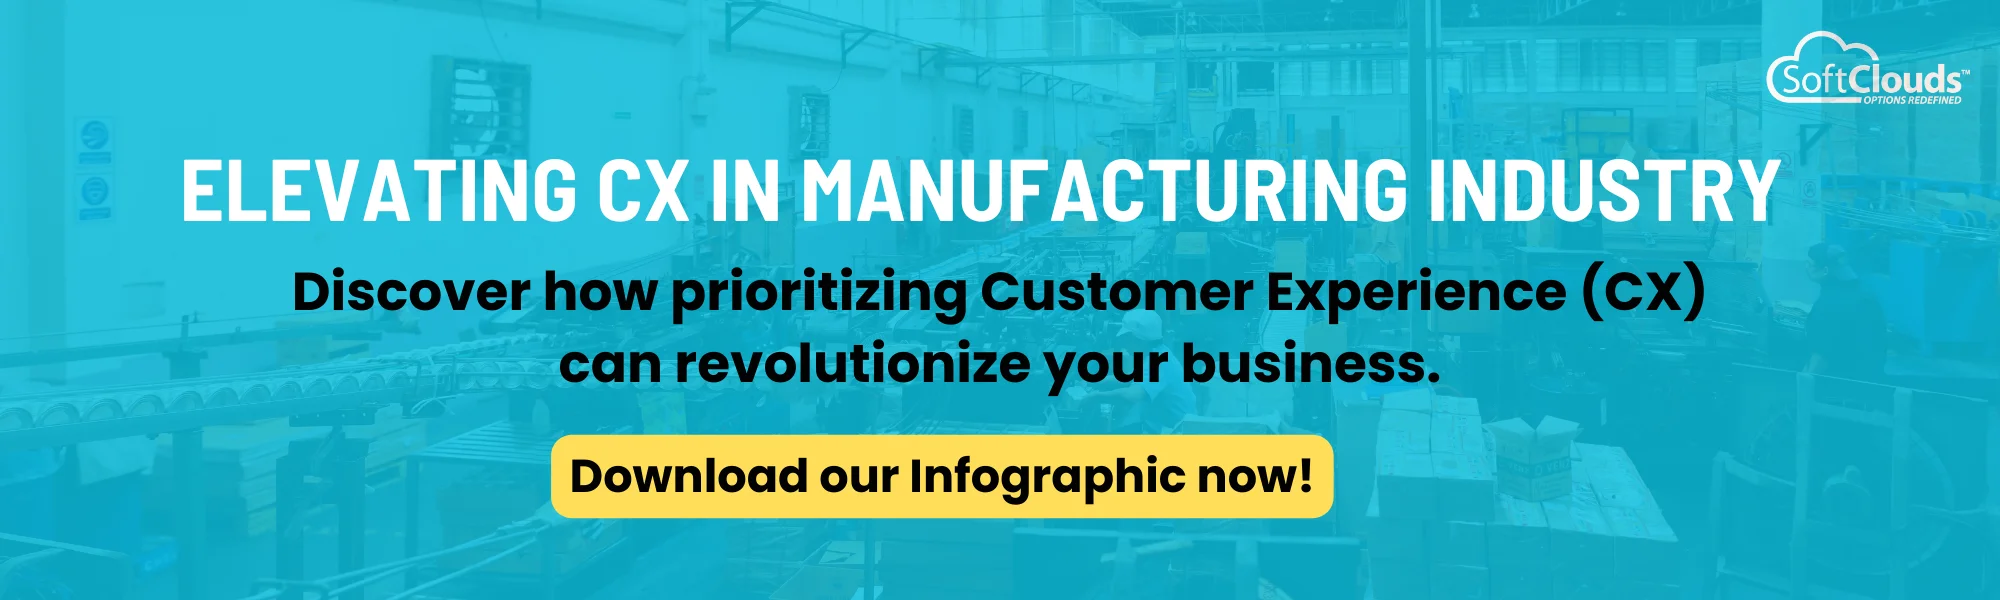 elevating-CX-in-manufacturing-industry